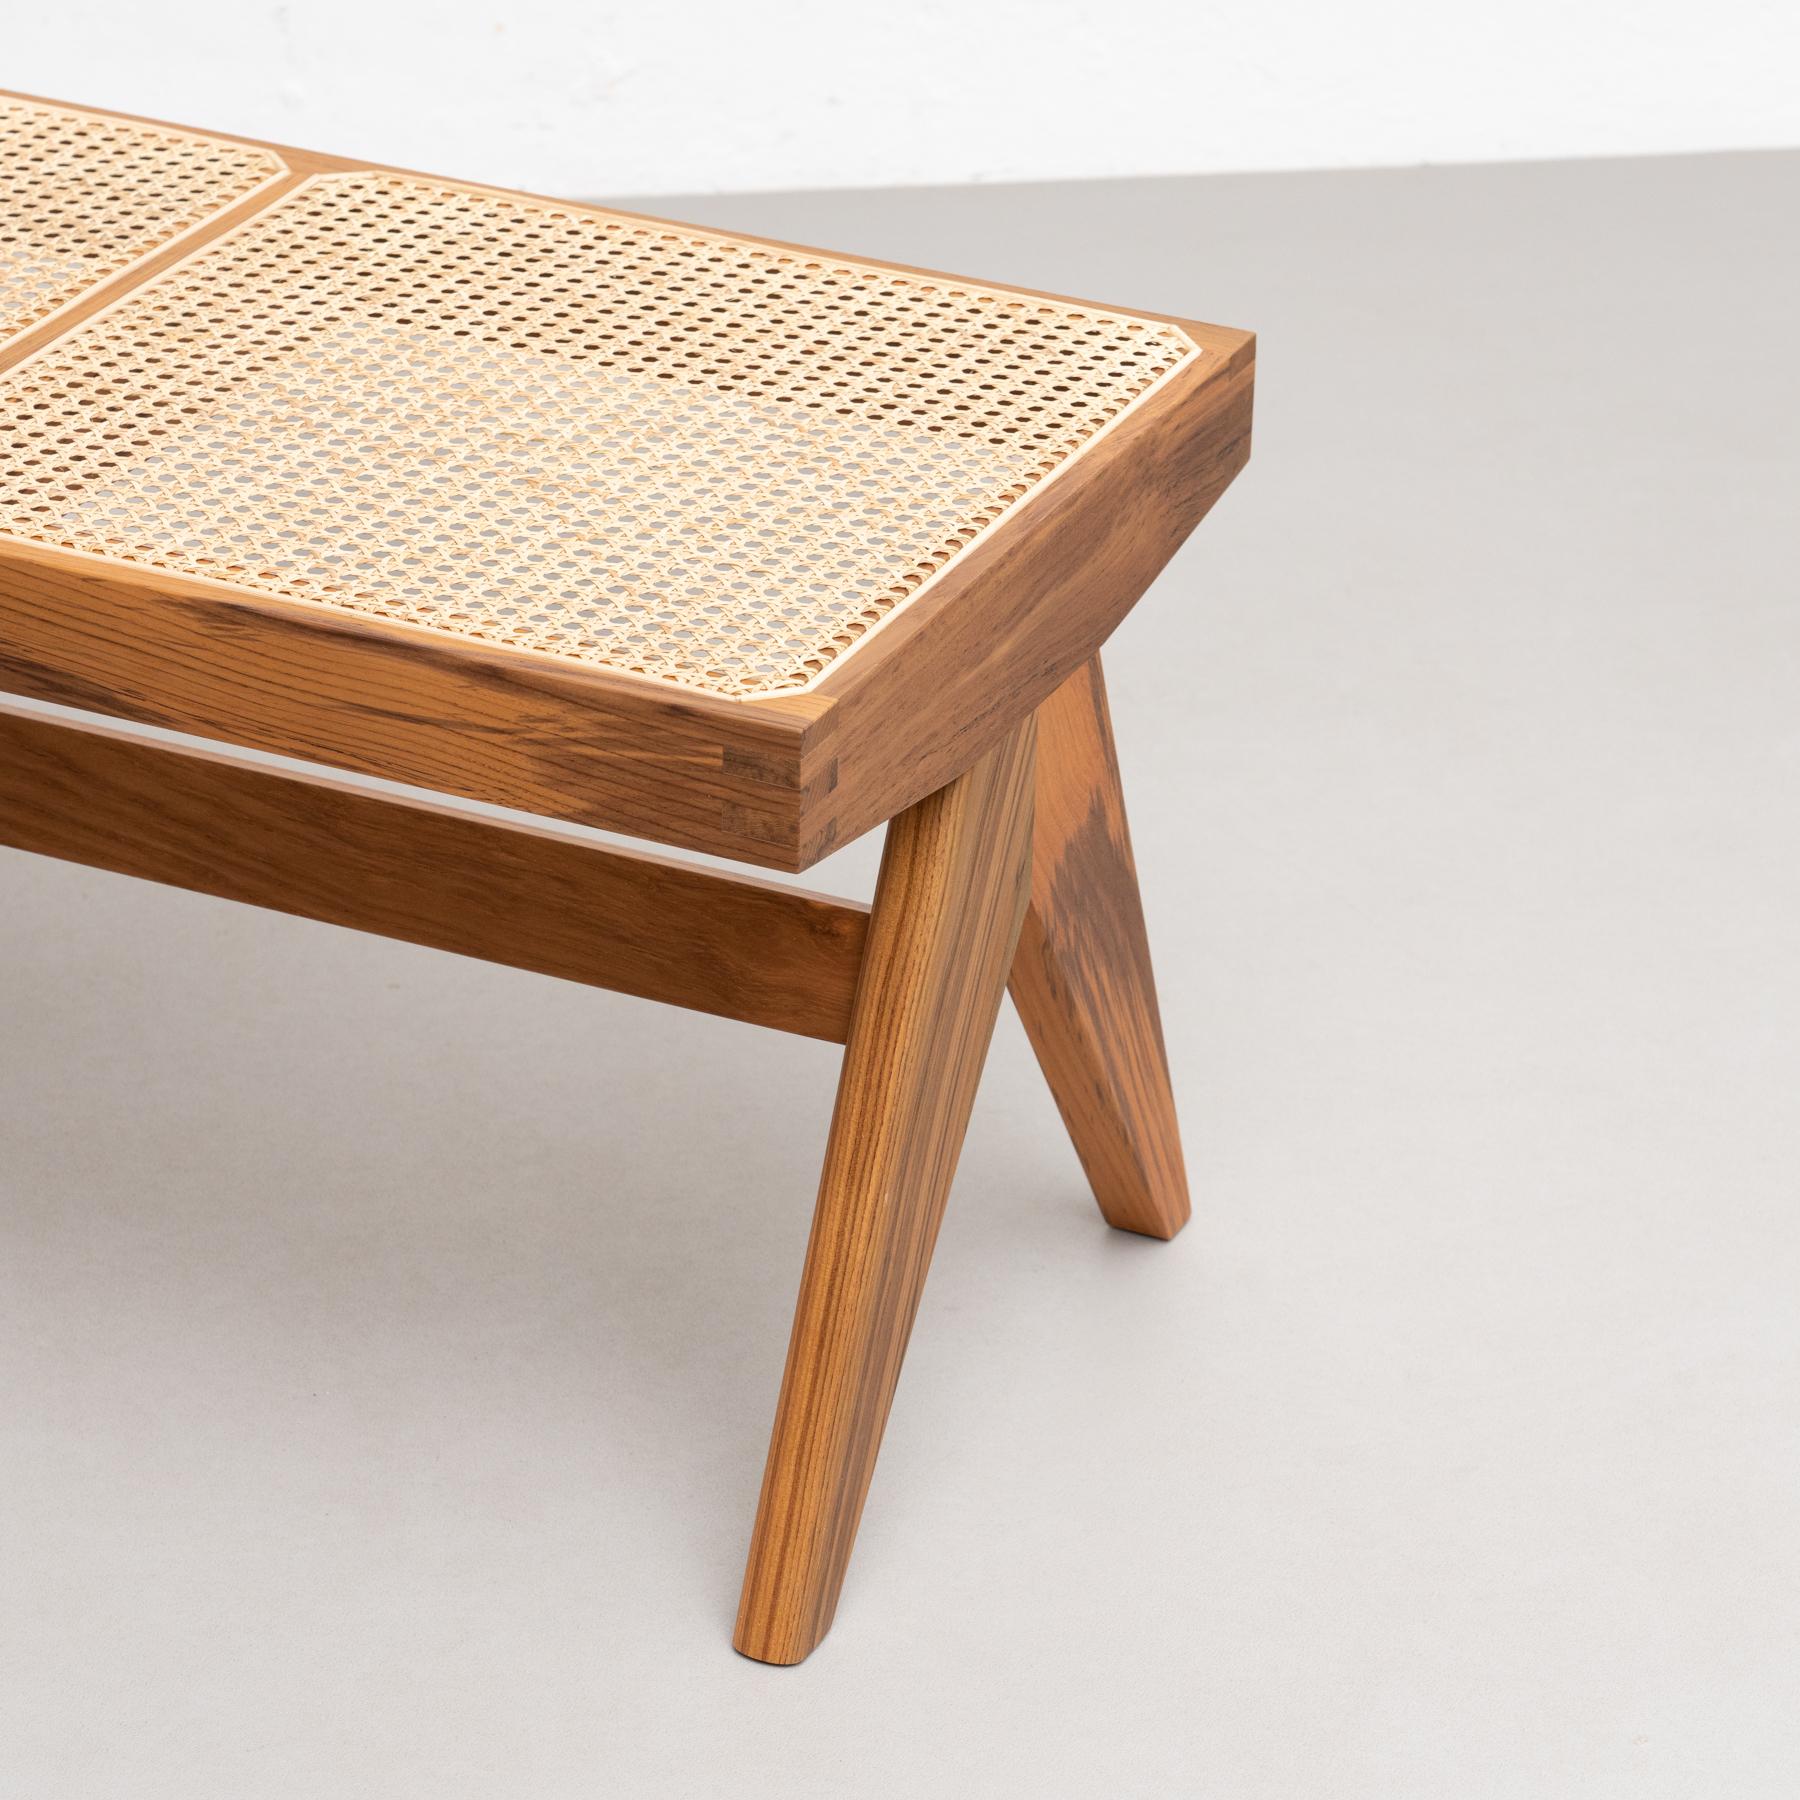 Pierre Jeanneret 057 Civil Bench, Wood and Woven Viennese Cane 11